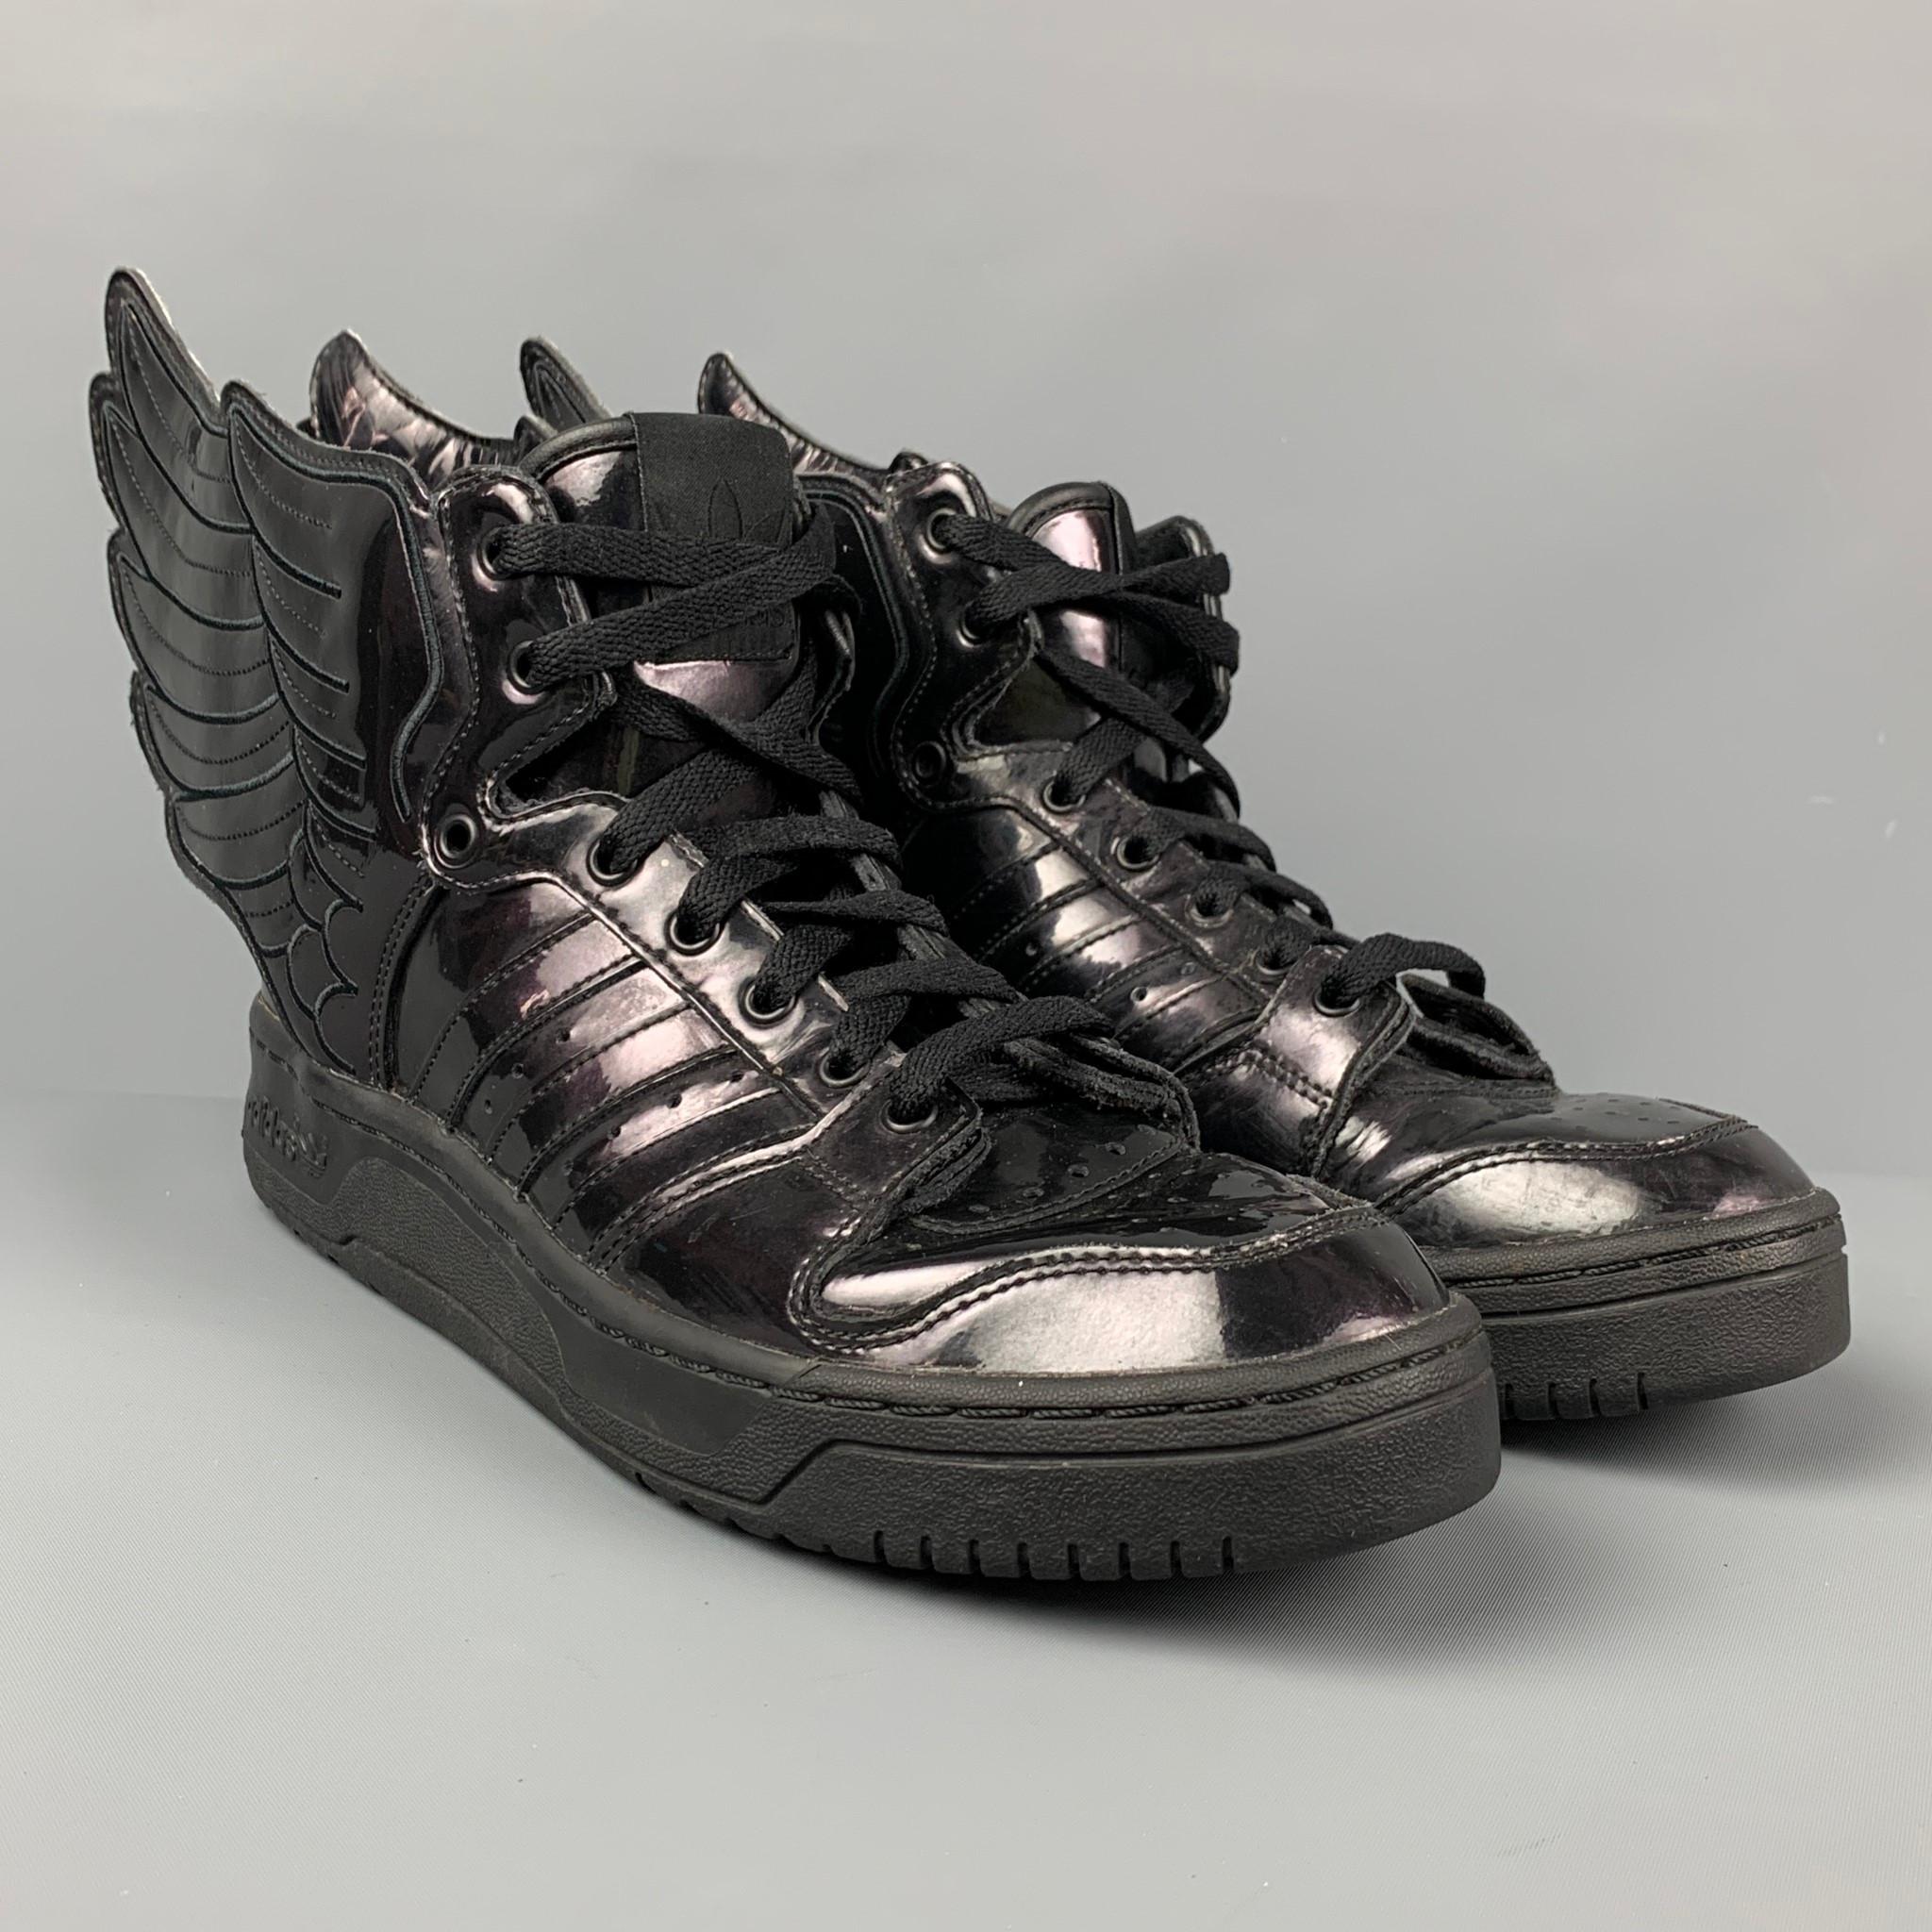 JEREMY SCOTT x ADIDAS sneakers comes in black patent leather featuring a wing design, rubber sole, and a lace up closure. 

Very Good Pre-Owned Condition.
Marked: 9

Outsole: 11.5 in. x 4 in. 